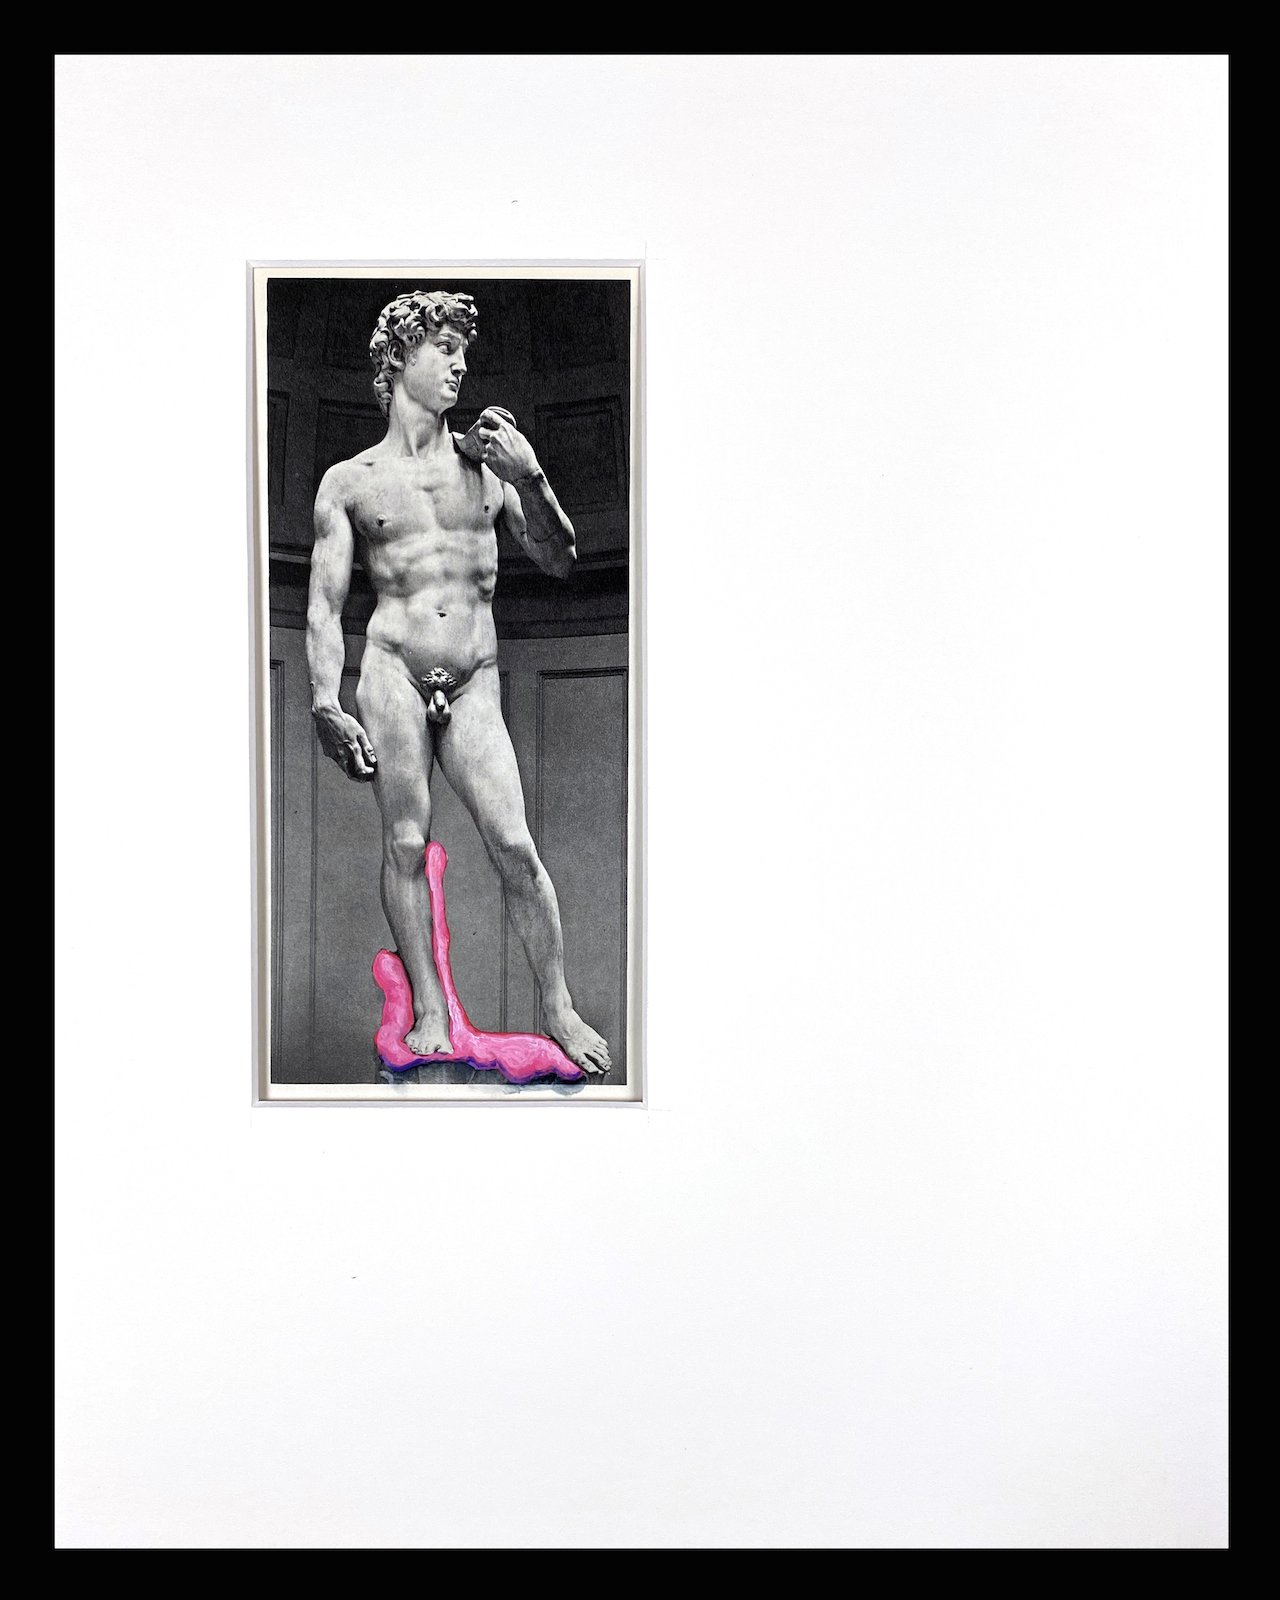    Bubble Gum on Michelangelo “David” (figure 534) – Part 3: Chapter 3. The High Renaissance in Italy ,  acrylic, watercolor, ink on textbook paper, framed: 15” x 12” 